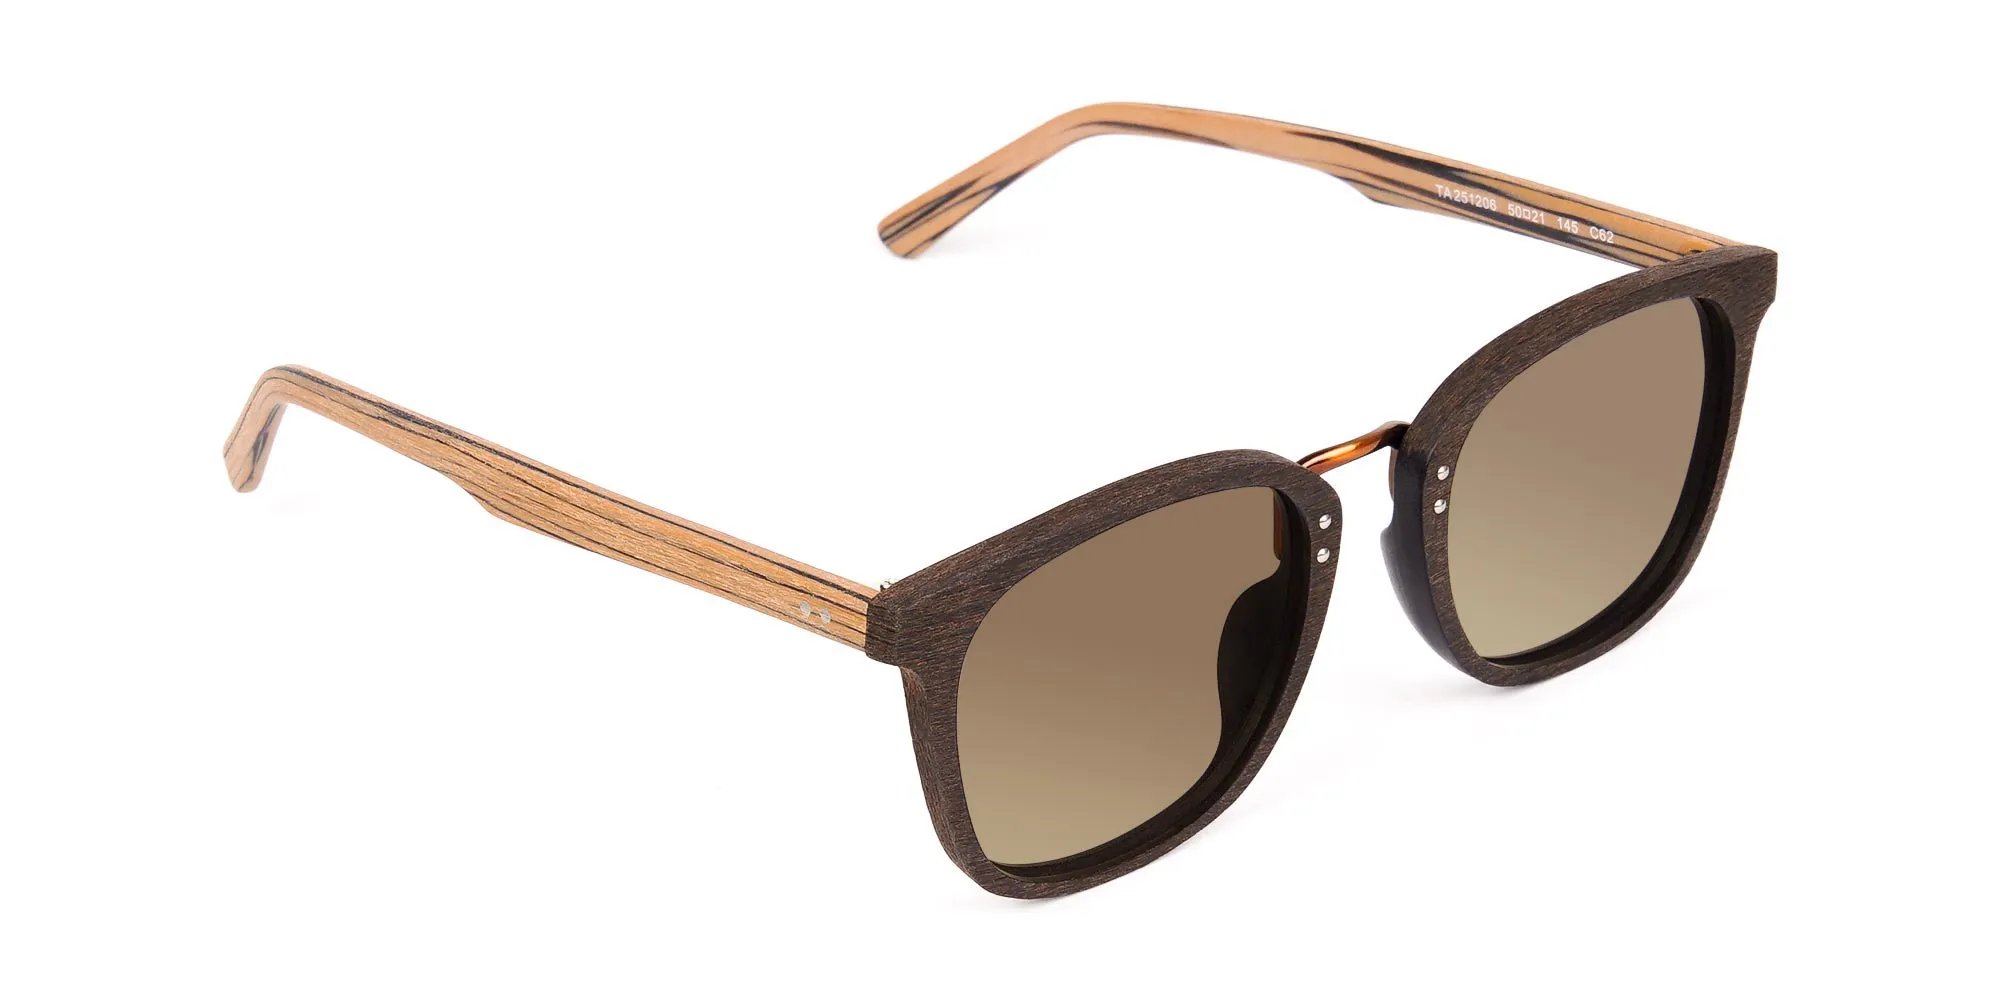 Middlewood 62 S Wooden Brown Square Sunglasses With Brown Tint Specscart®